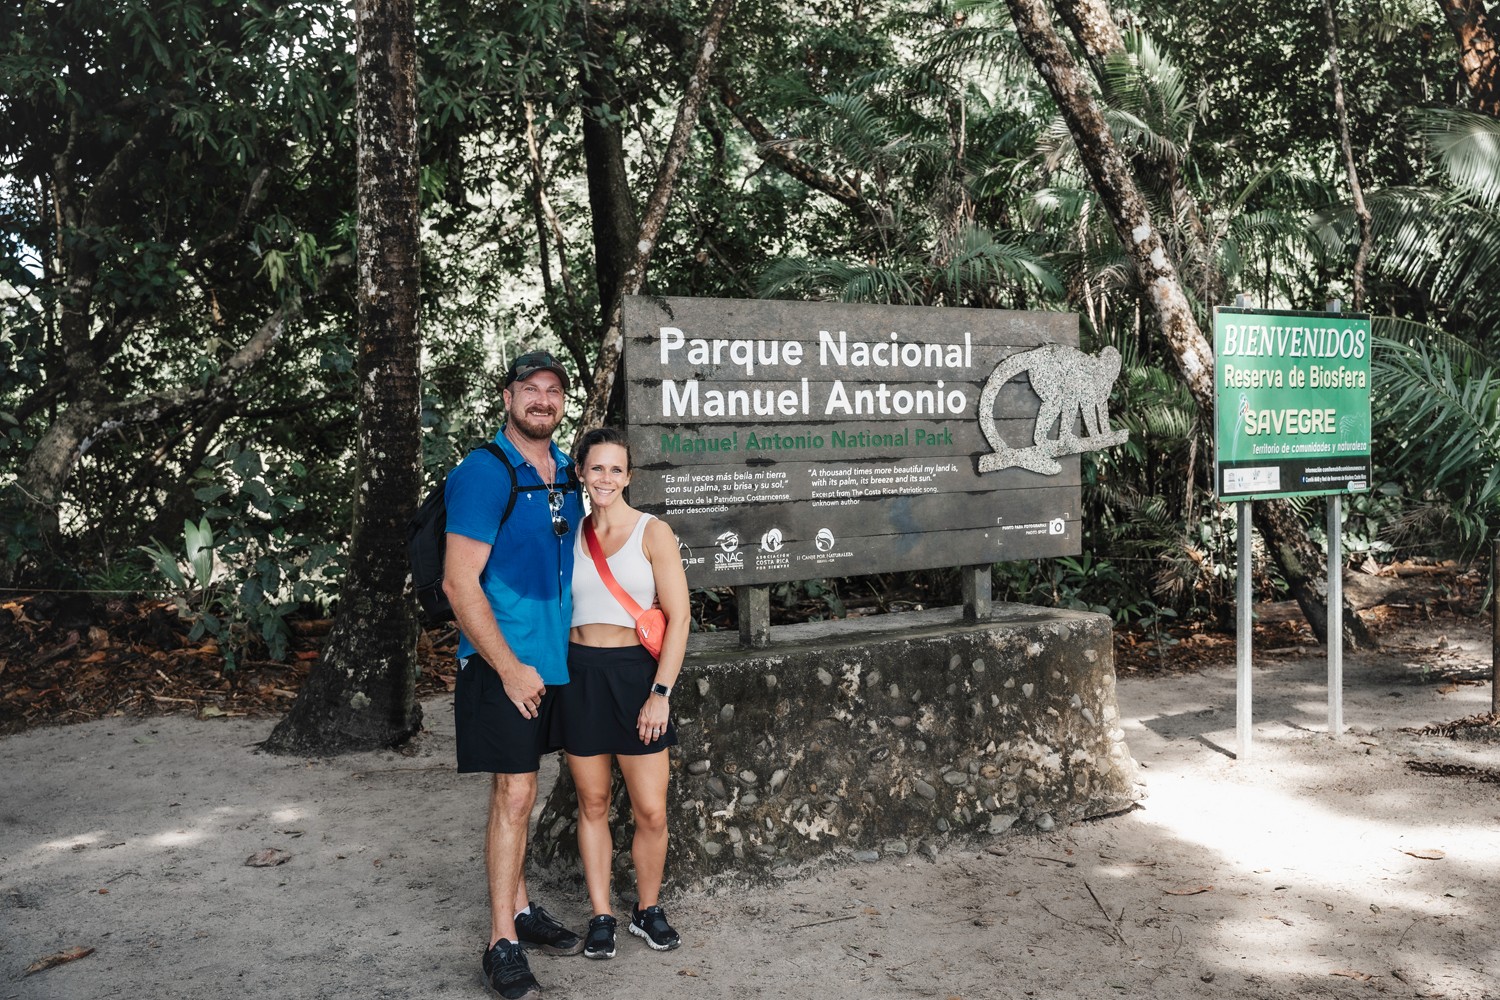 Things to Know Before You Go to Manuel Antonio